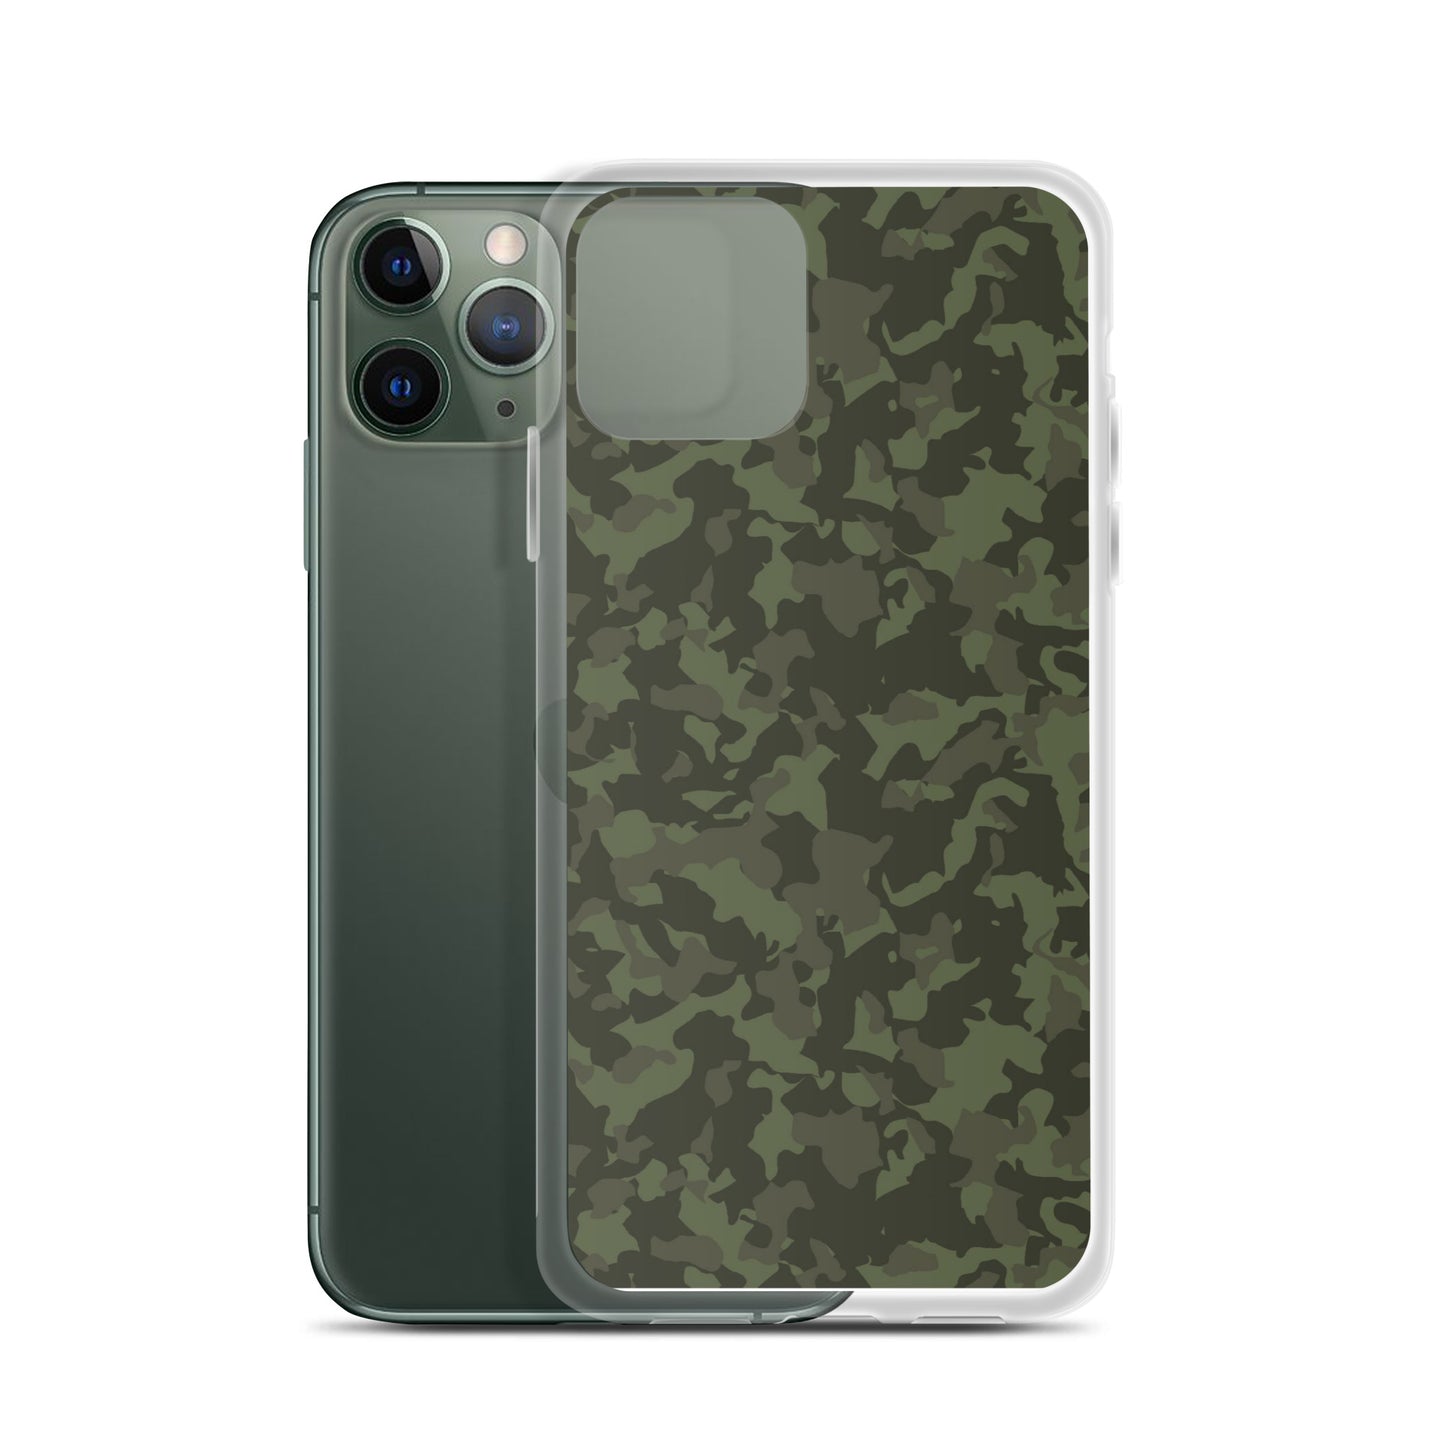 Swamp Battle - Clear Case for iPhone